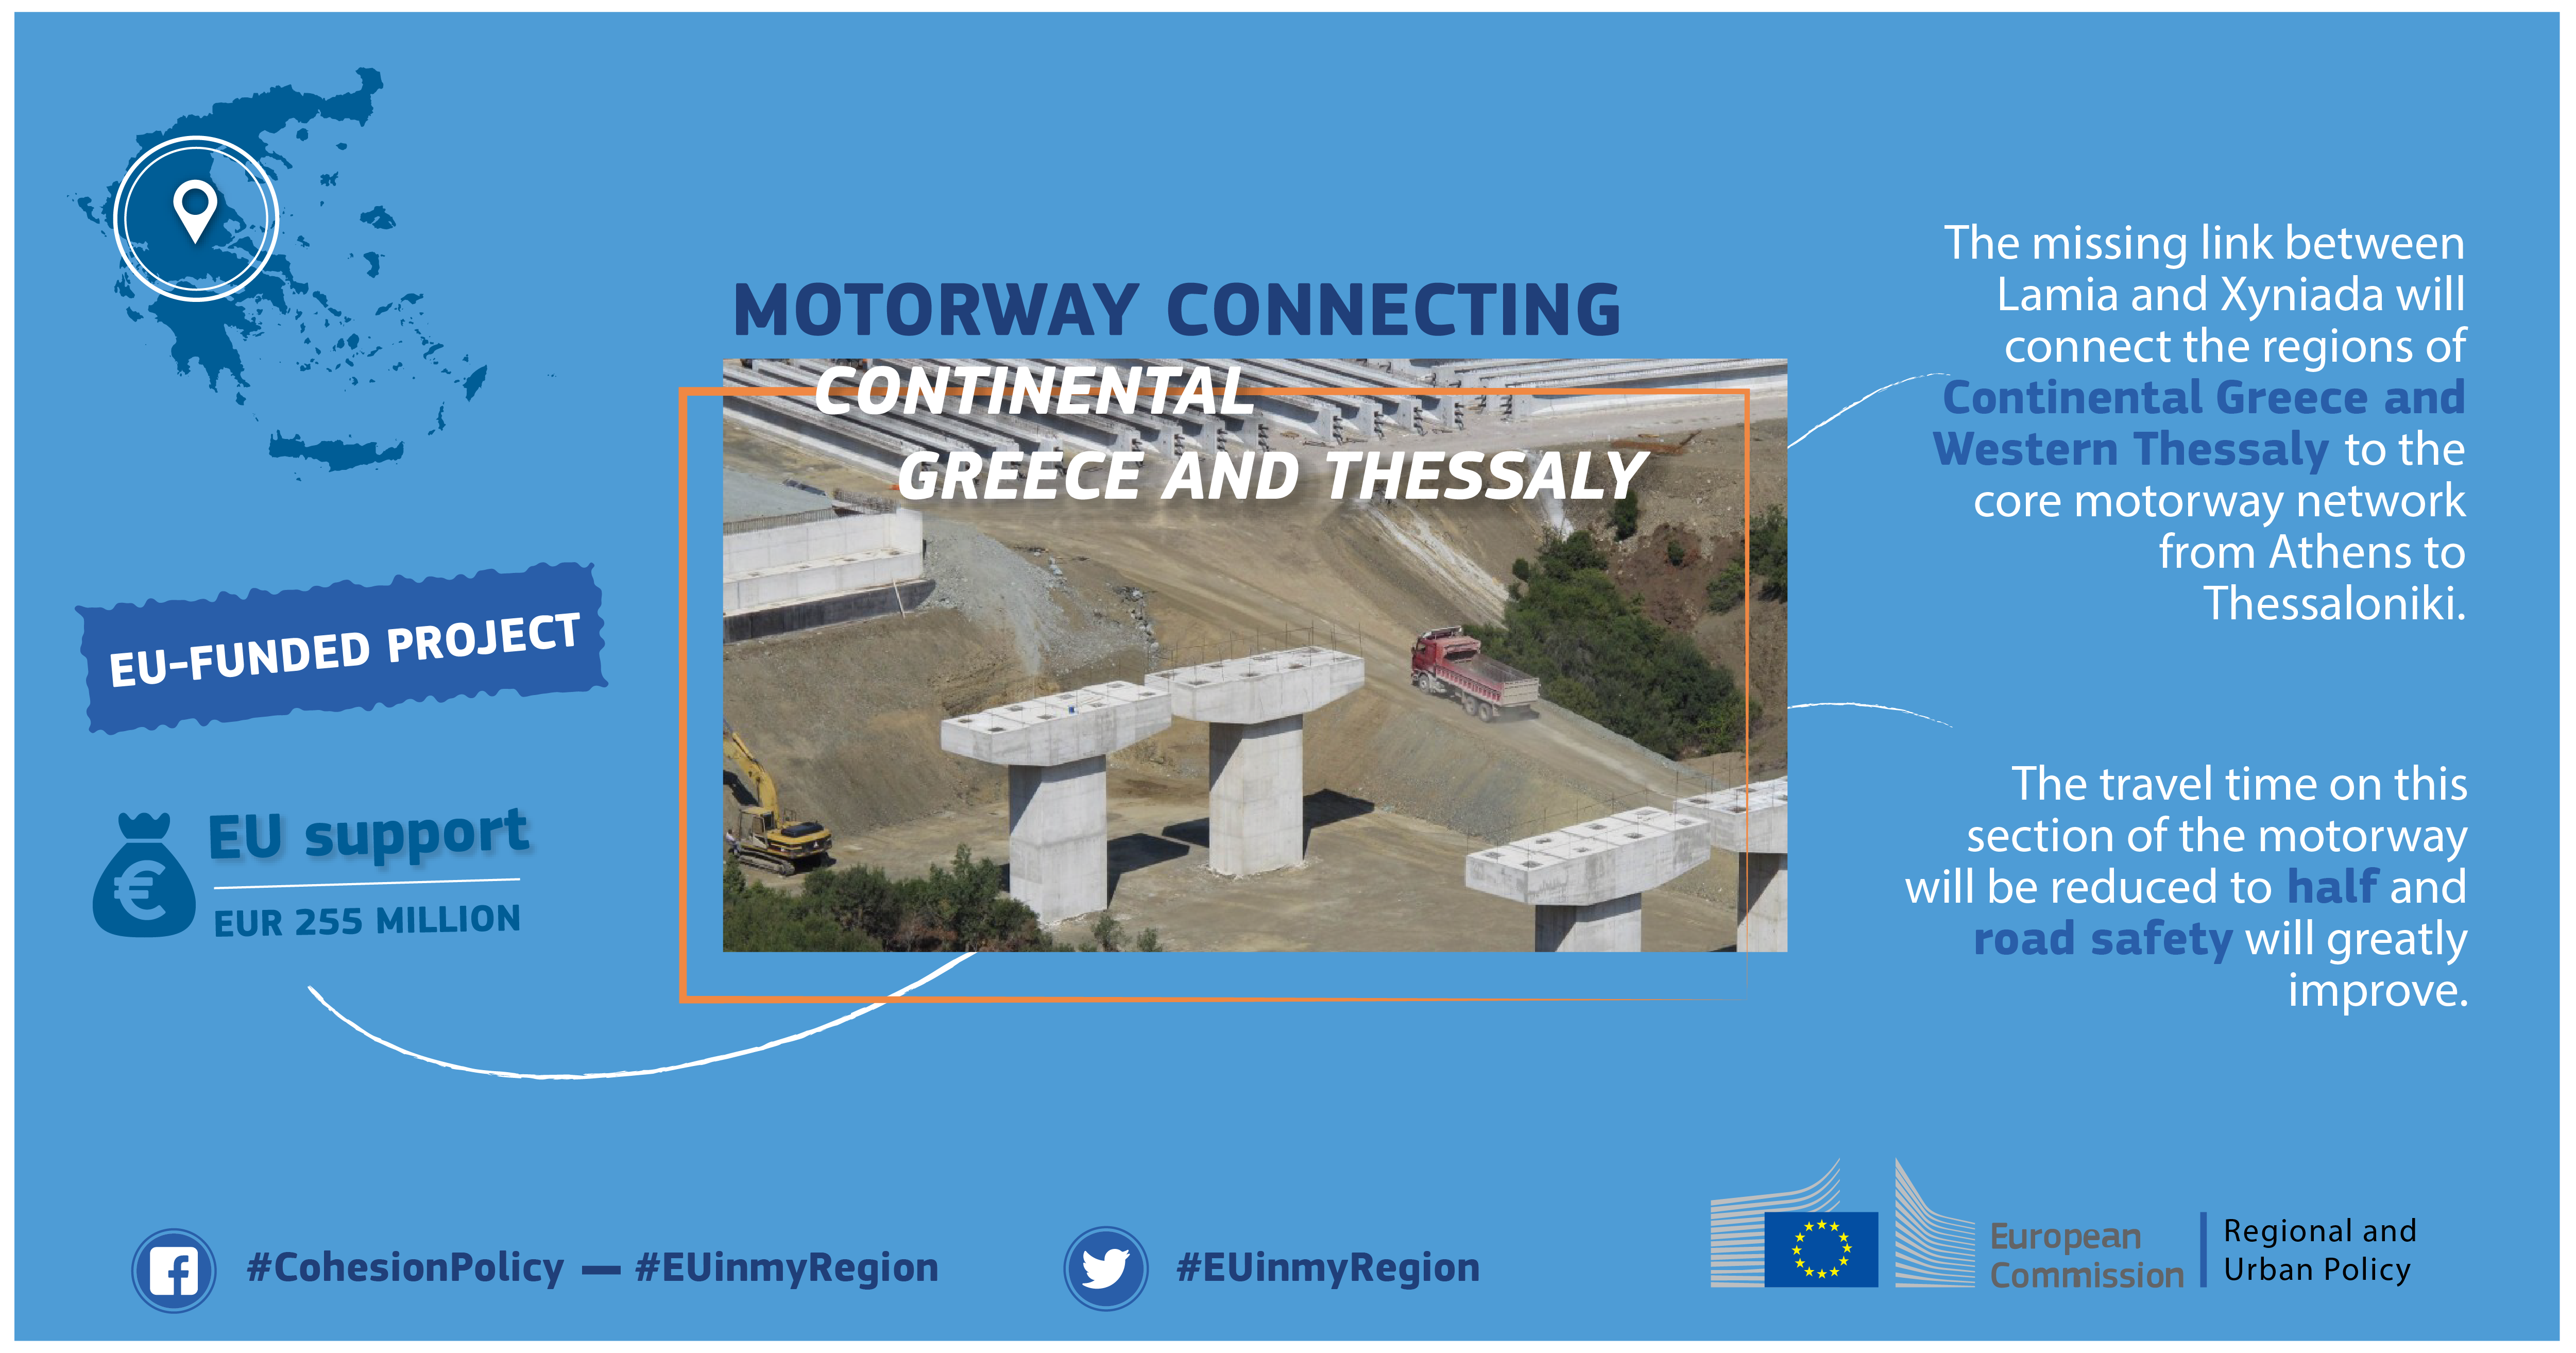 Cohesion Policy Eu Funds New Motorway Section In Central Greece Regional Policy European Commission